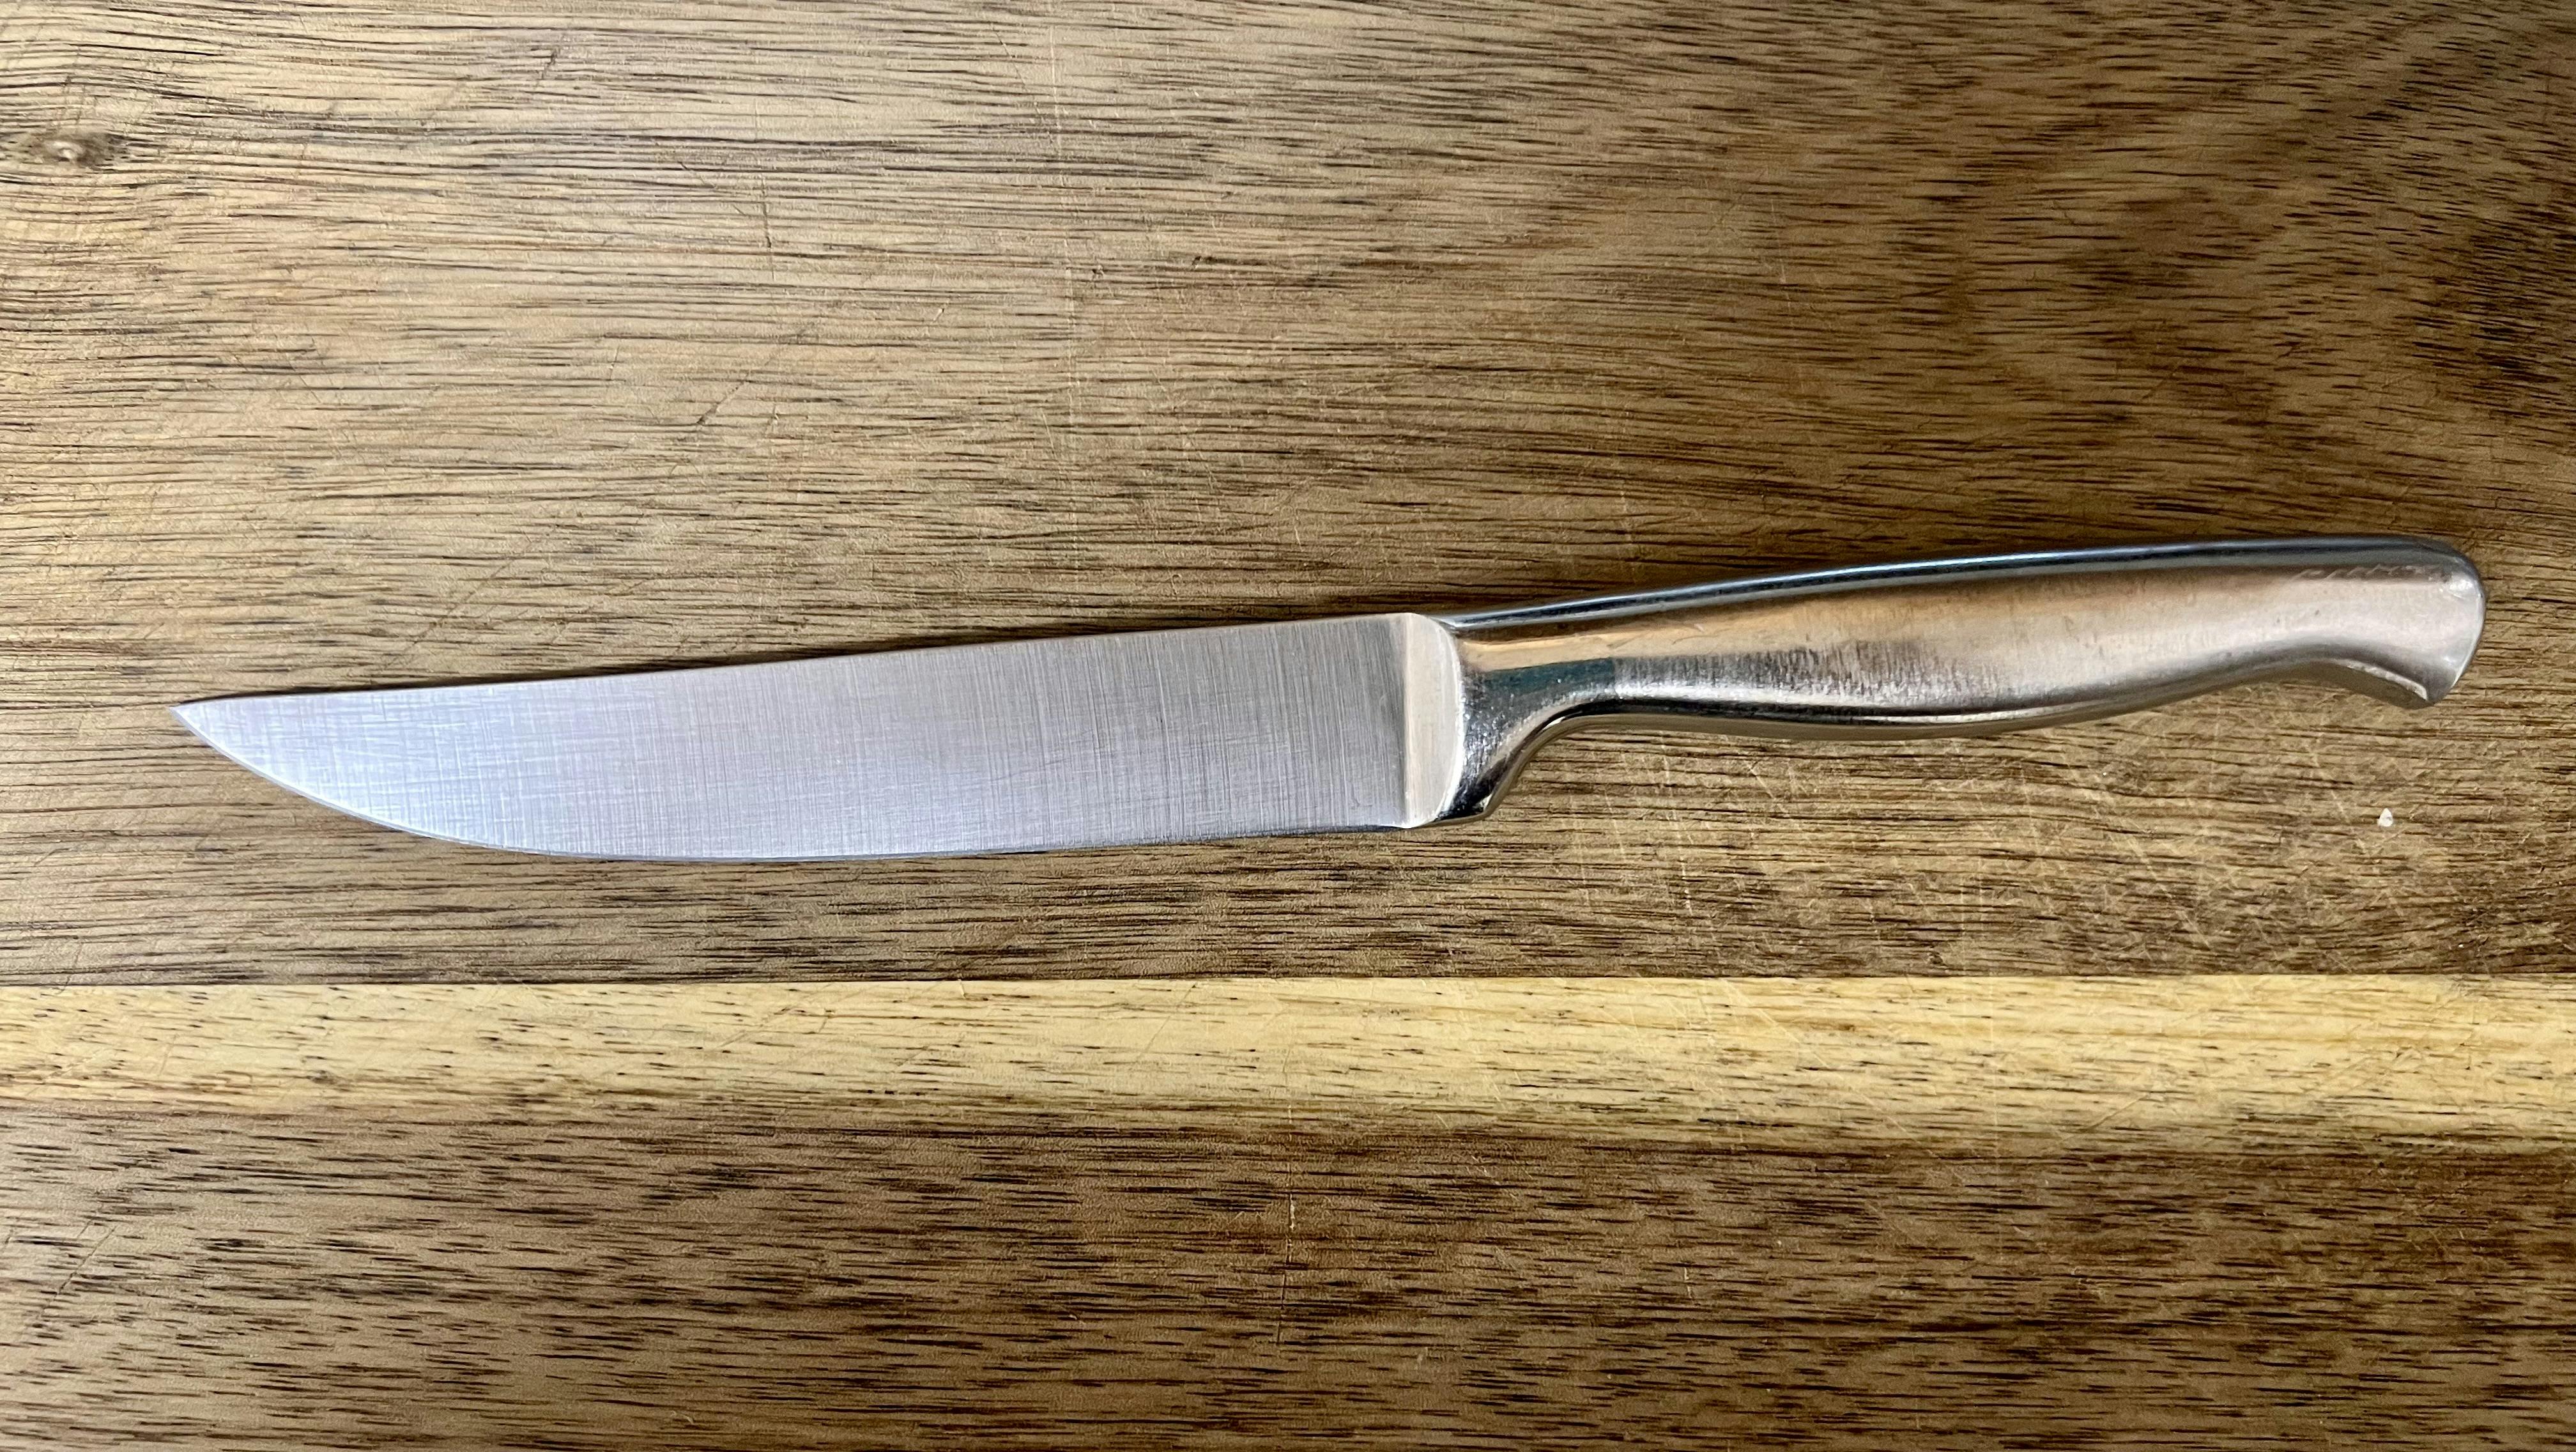 What to Look for When Buying Steak Knives - Made In